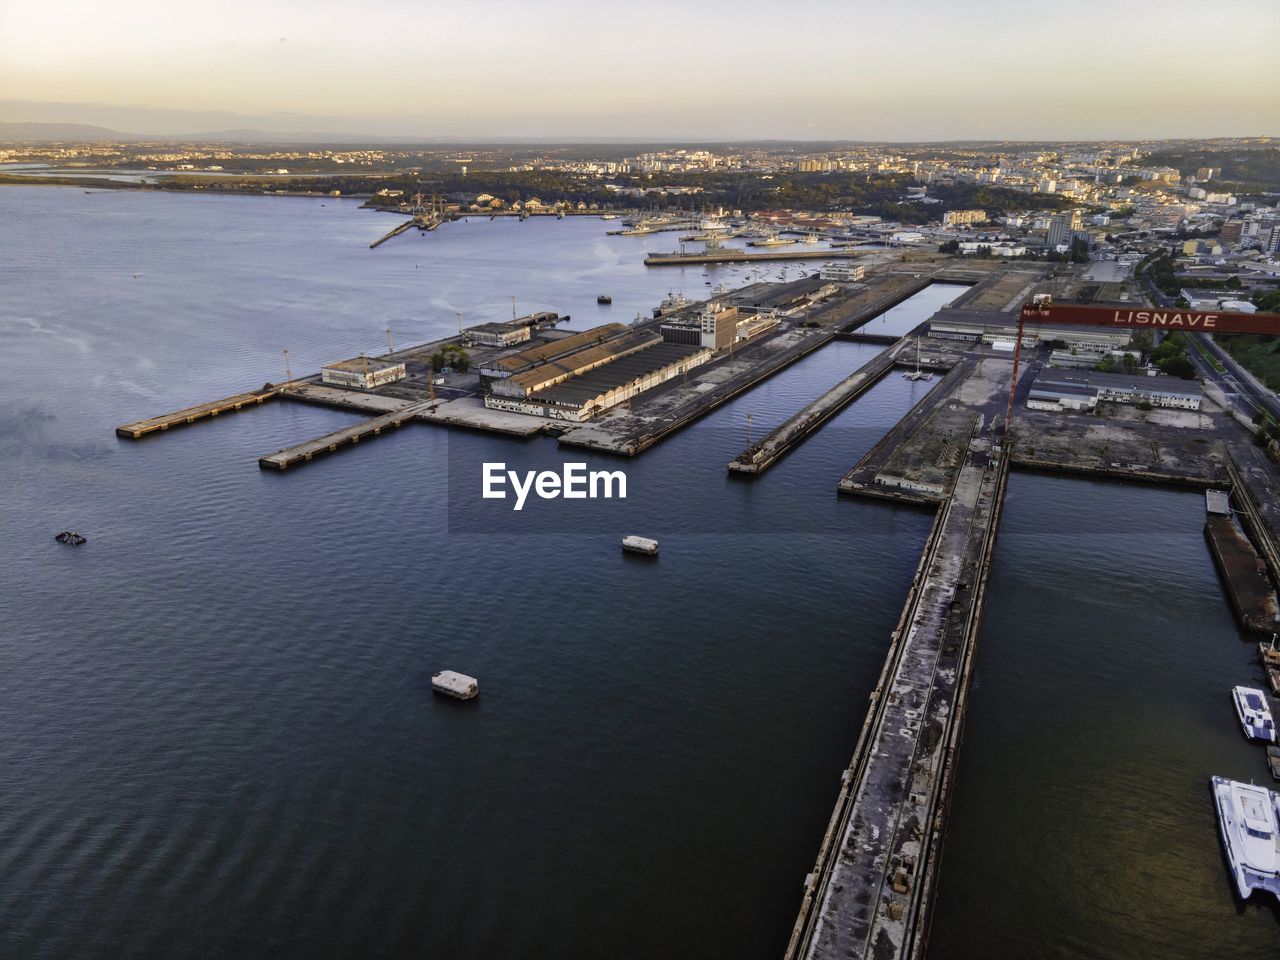 HIGH ANGLE VIEW OF COMMERCIAL DOCK